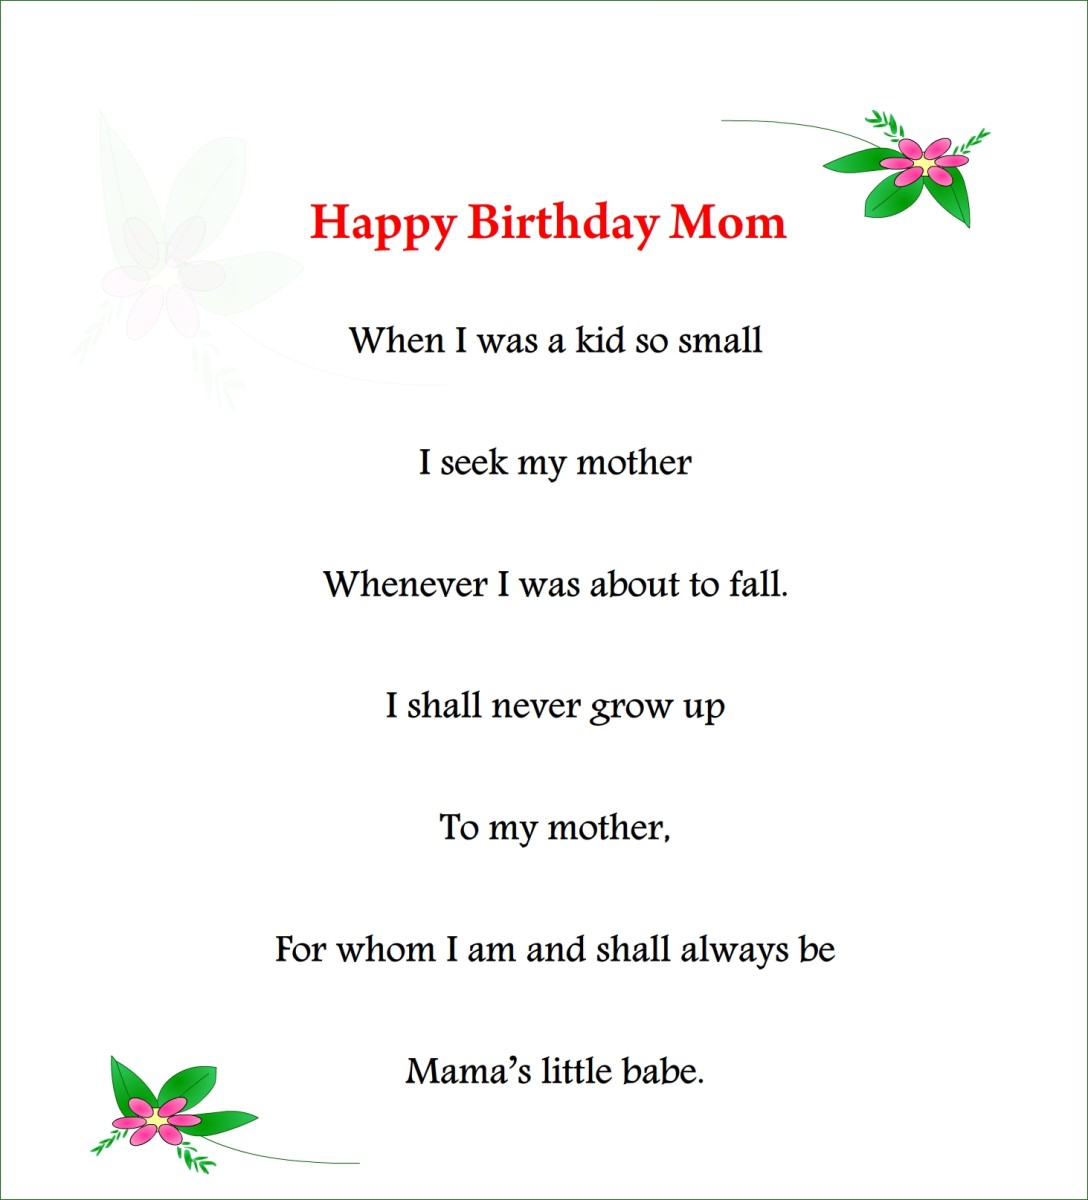 Amazing Happy Birthday Poems for Mom Make Your Mother